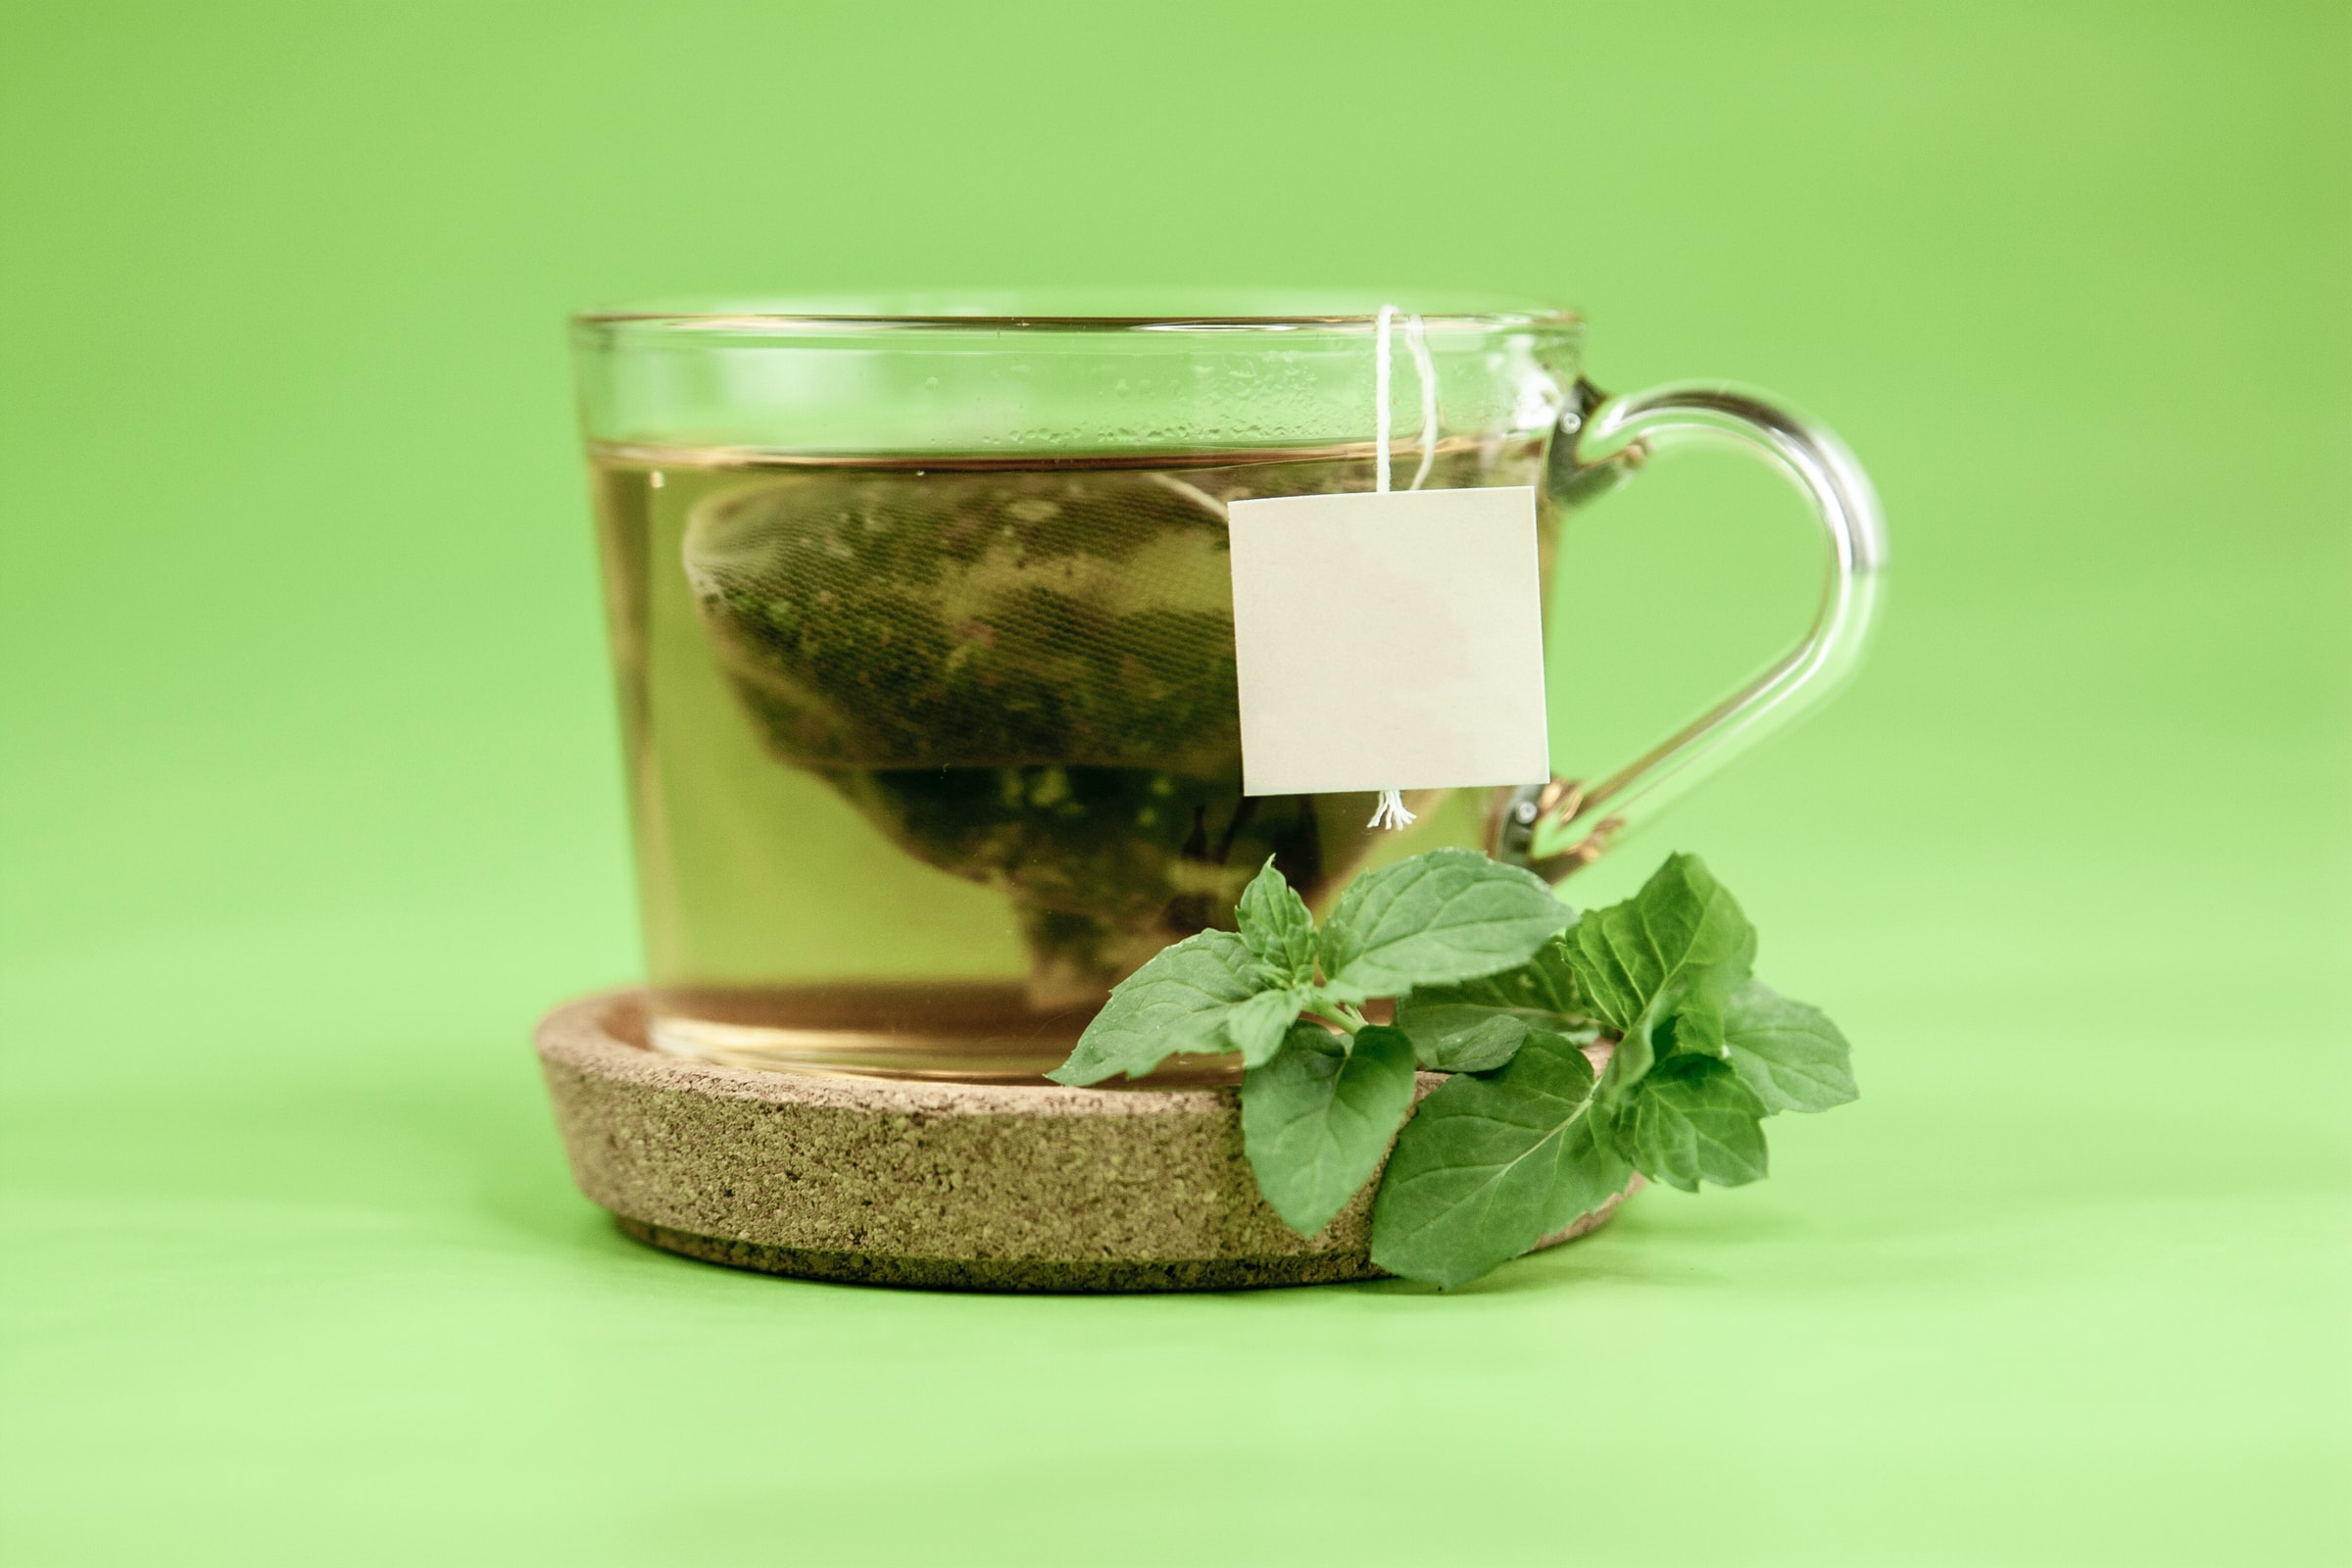 Green Tea Benefits That Will Make You Want To Drink More